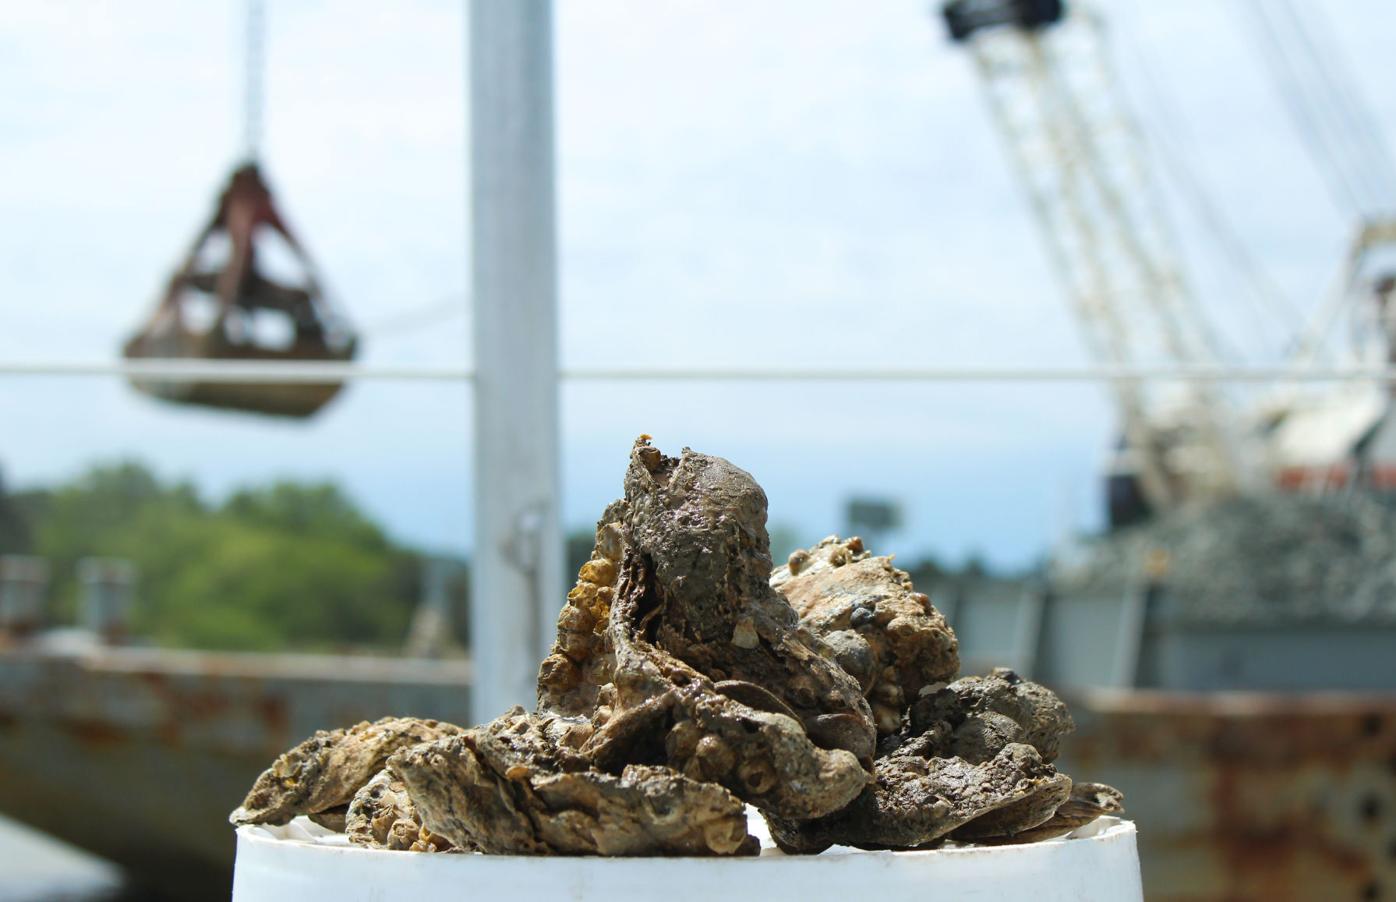 Oyster restoration in Tred Avon River nears completion